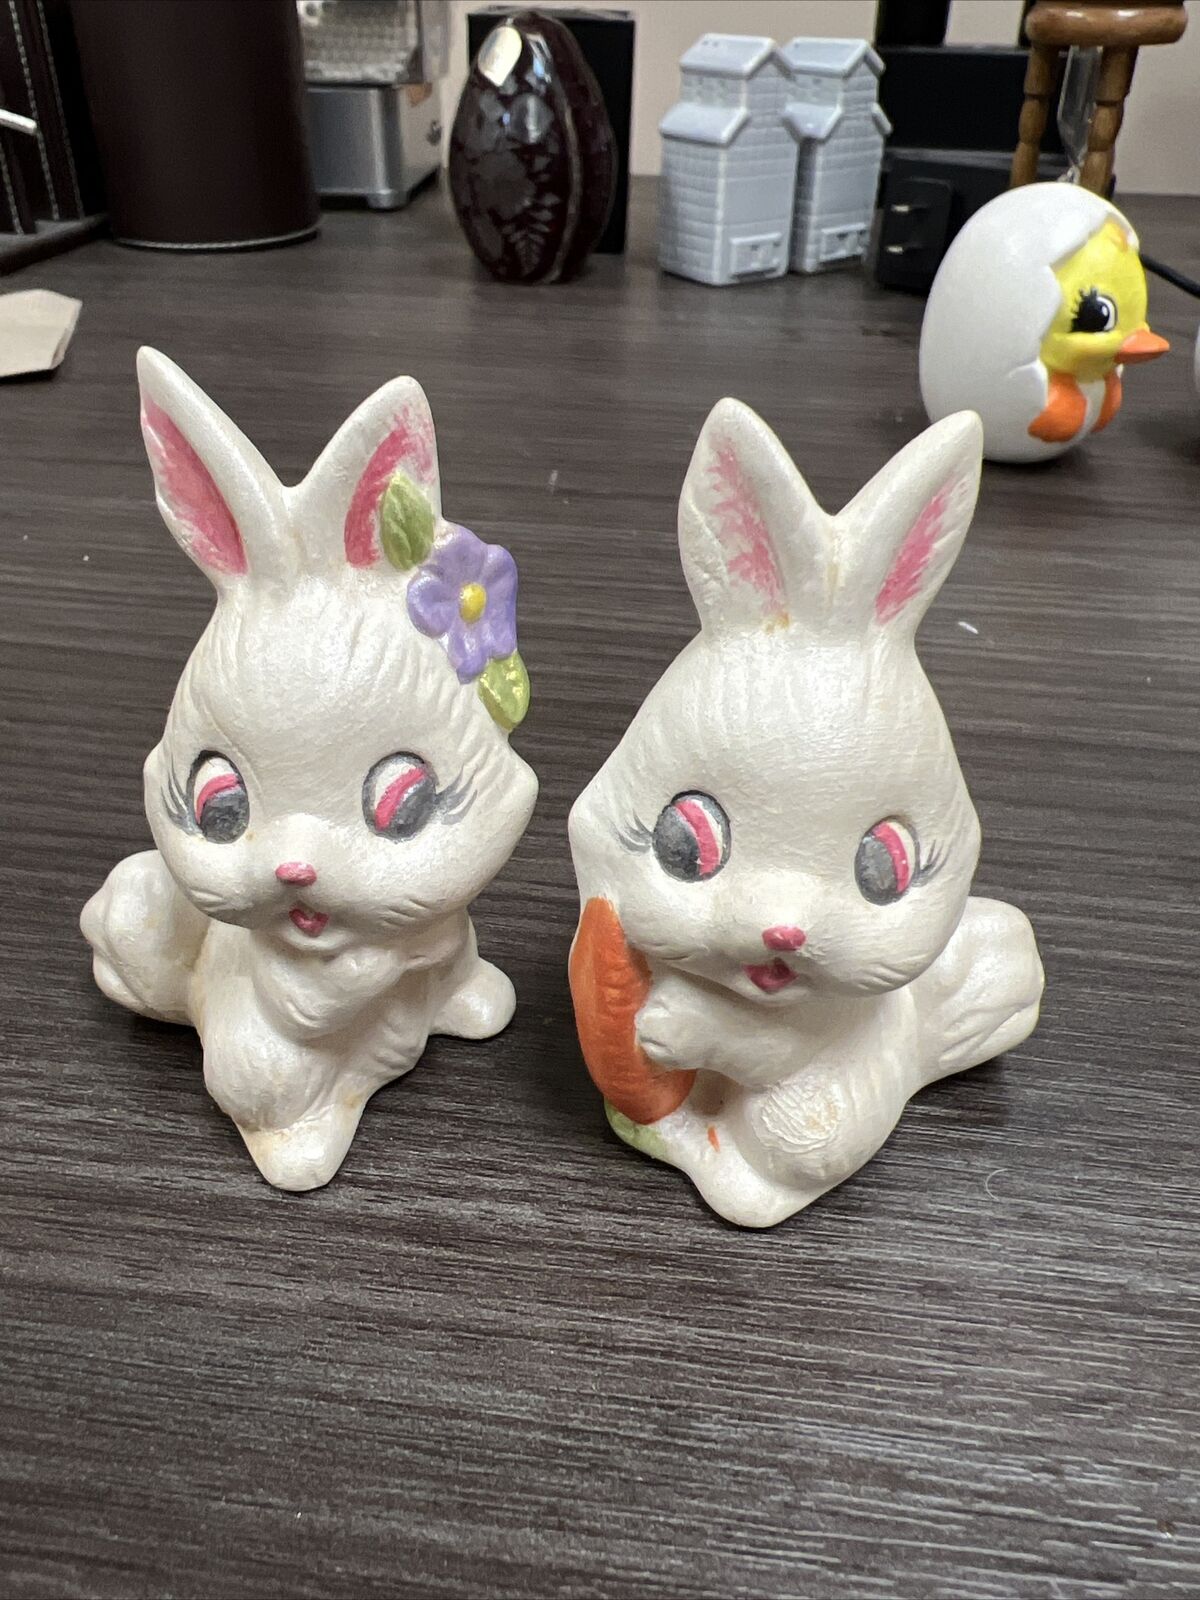 2 Vintage Rare DB Signed  Adorable  White Bunny Figures From 1982